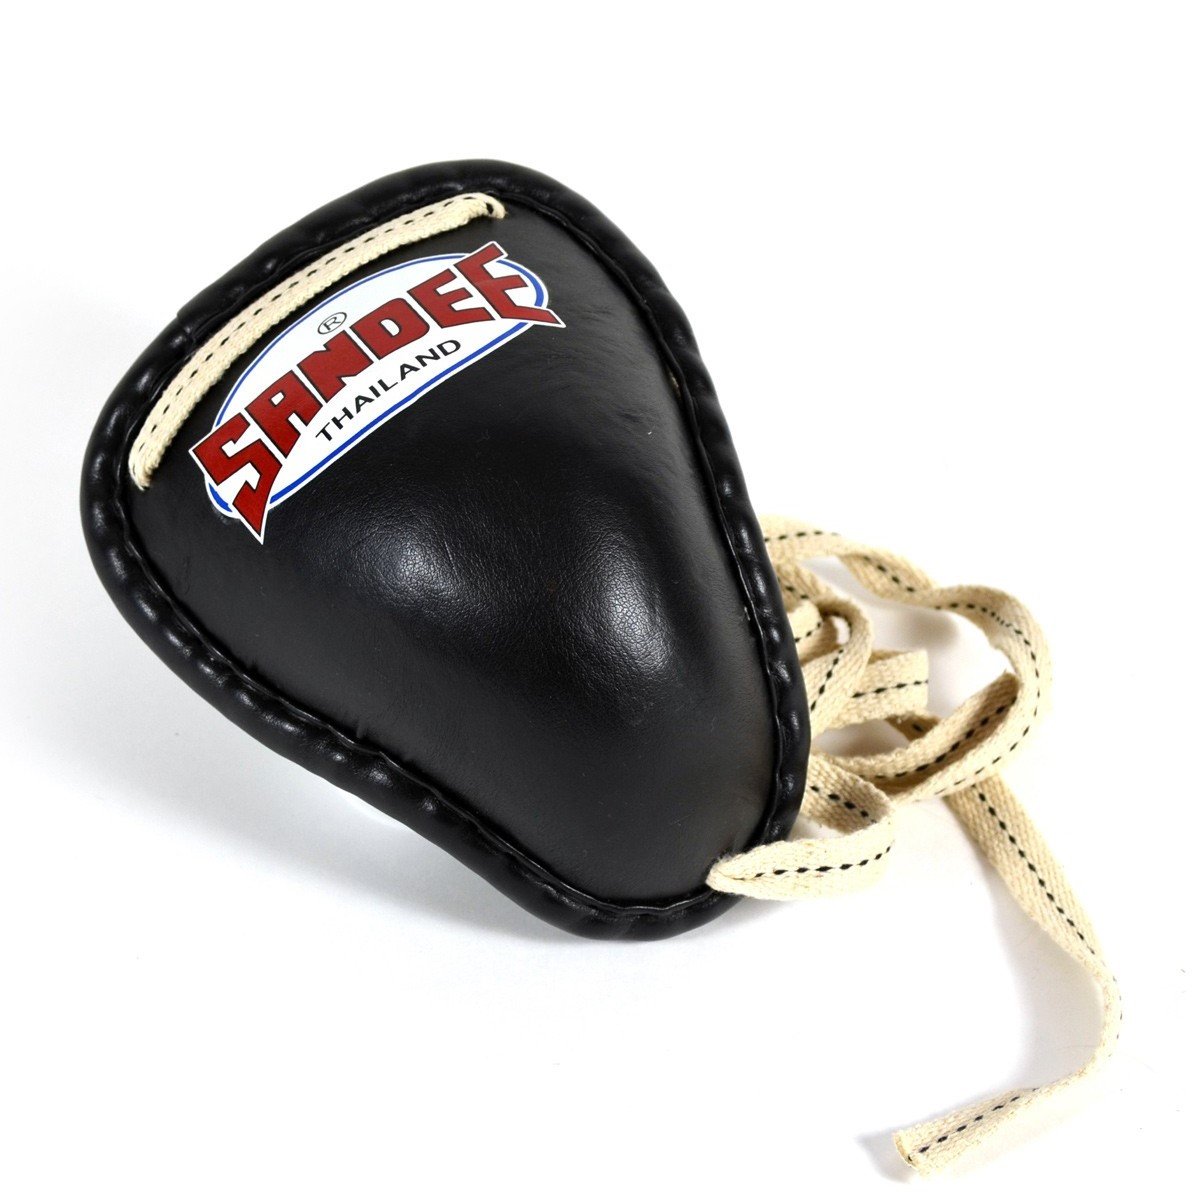 Sandee Muay Thai Steel Groin Guard - Click Image to Close